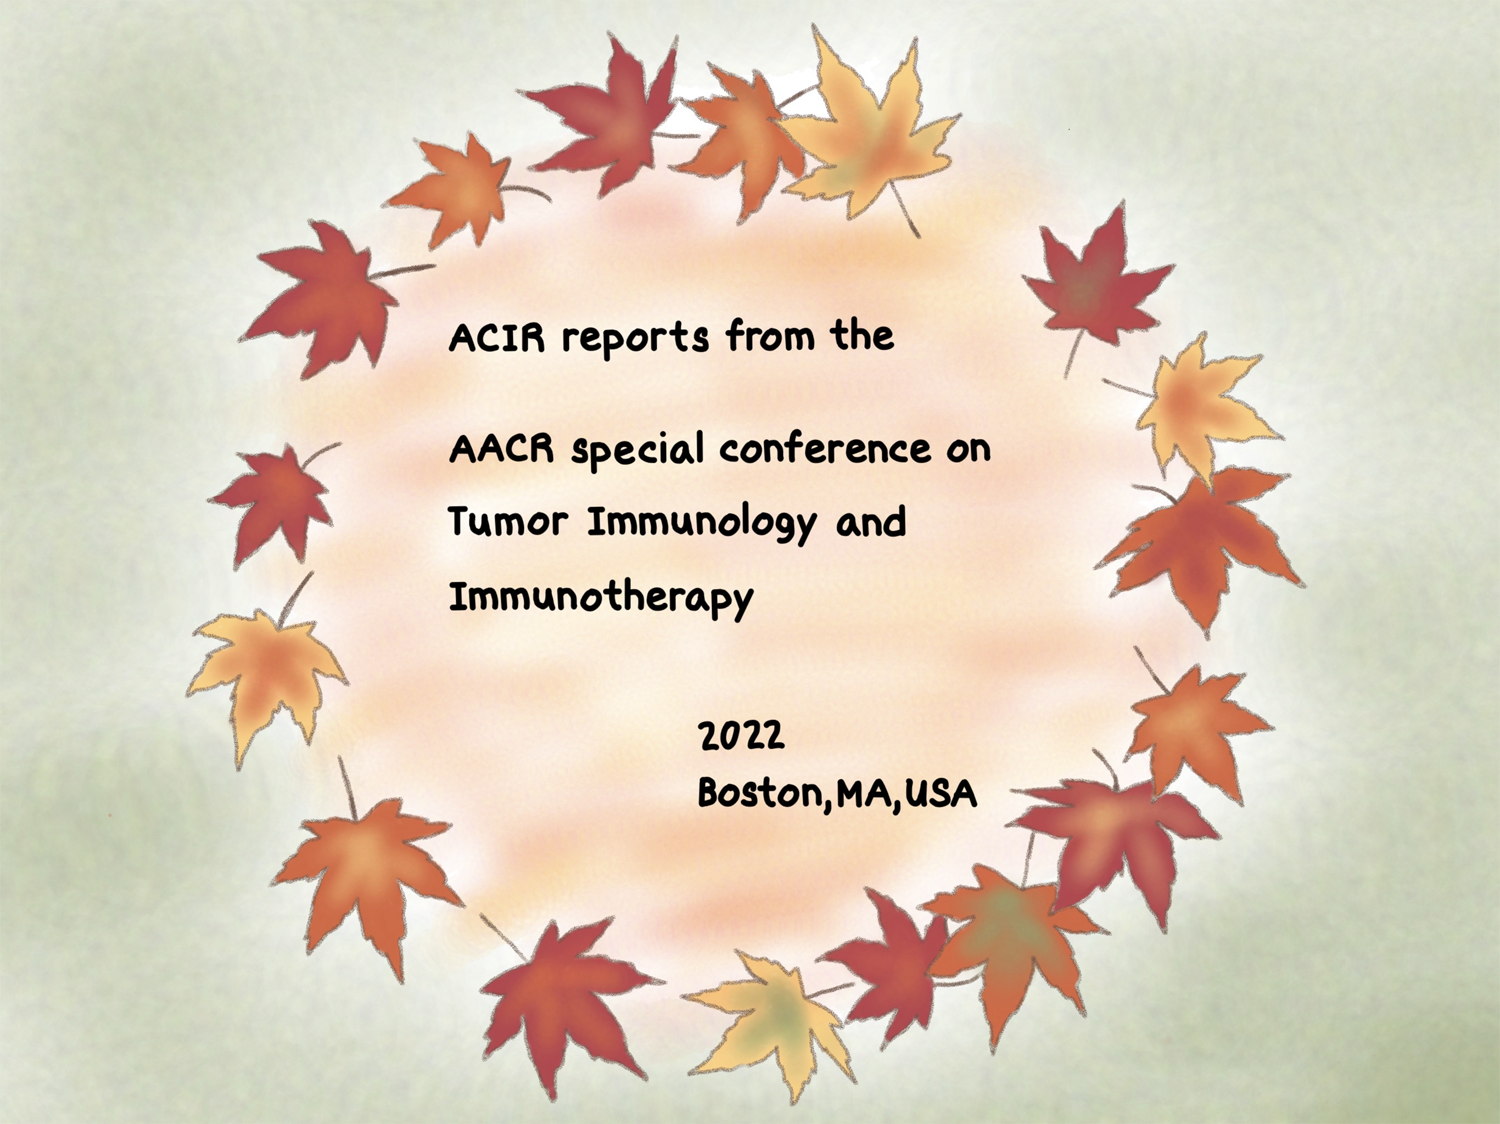 AACR Tumor Immunology and Immunotherapy Meeting 2022